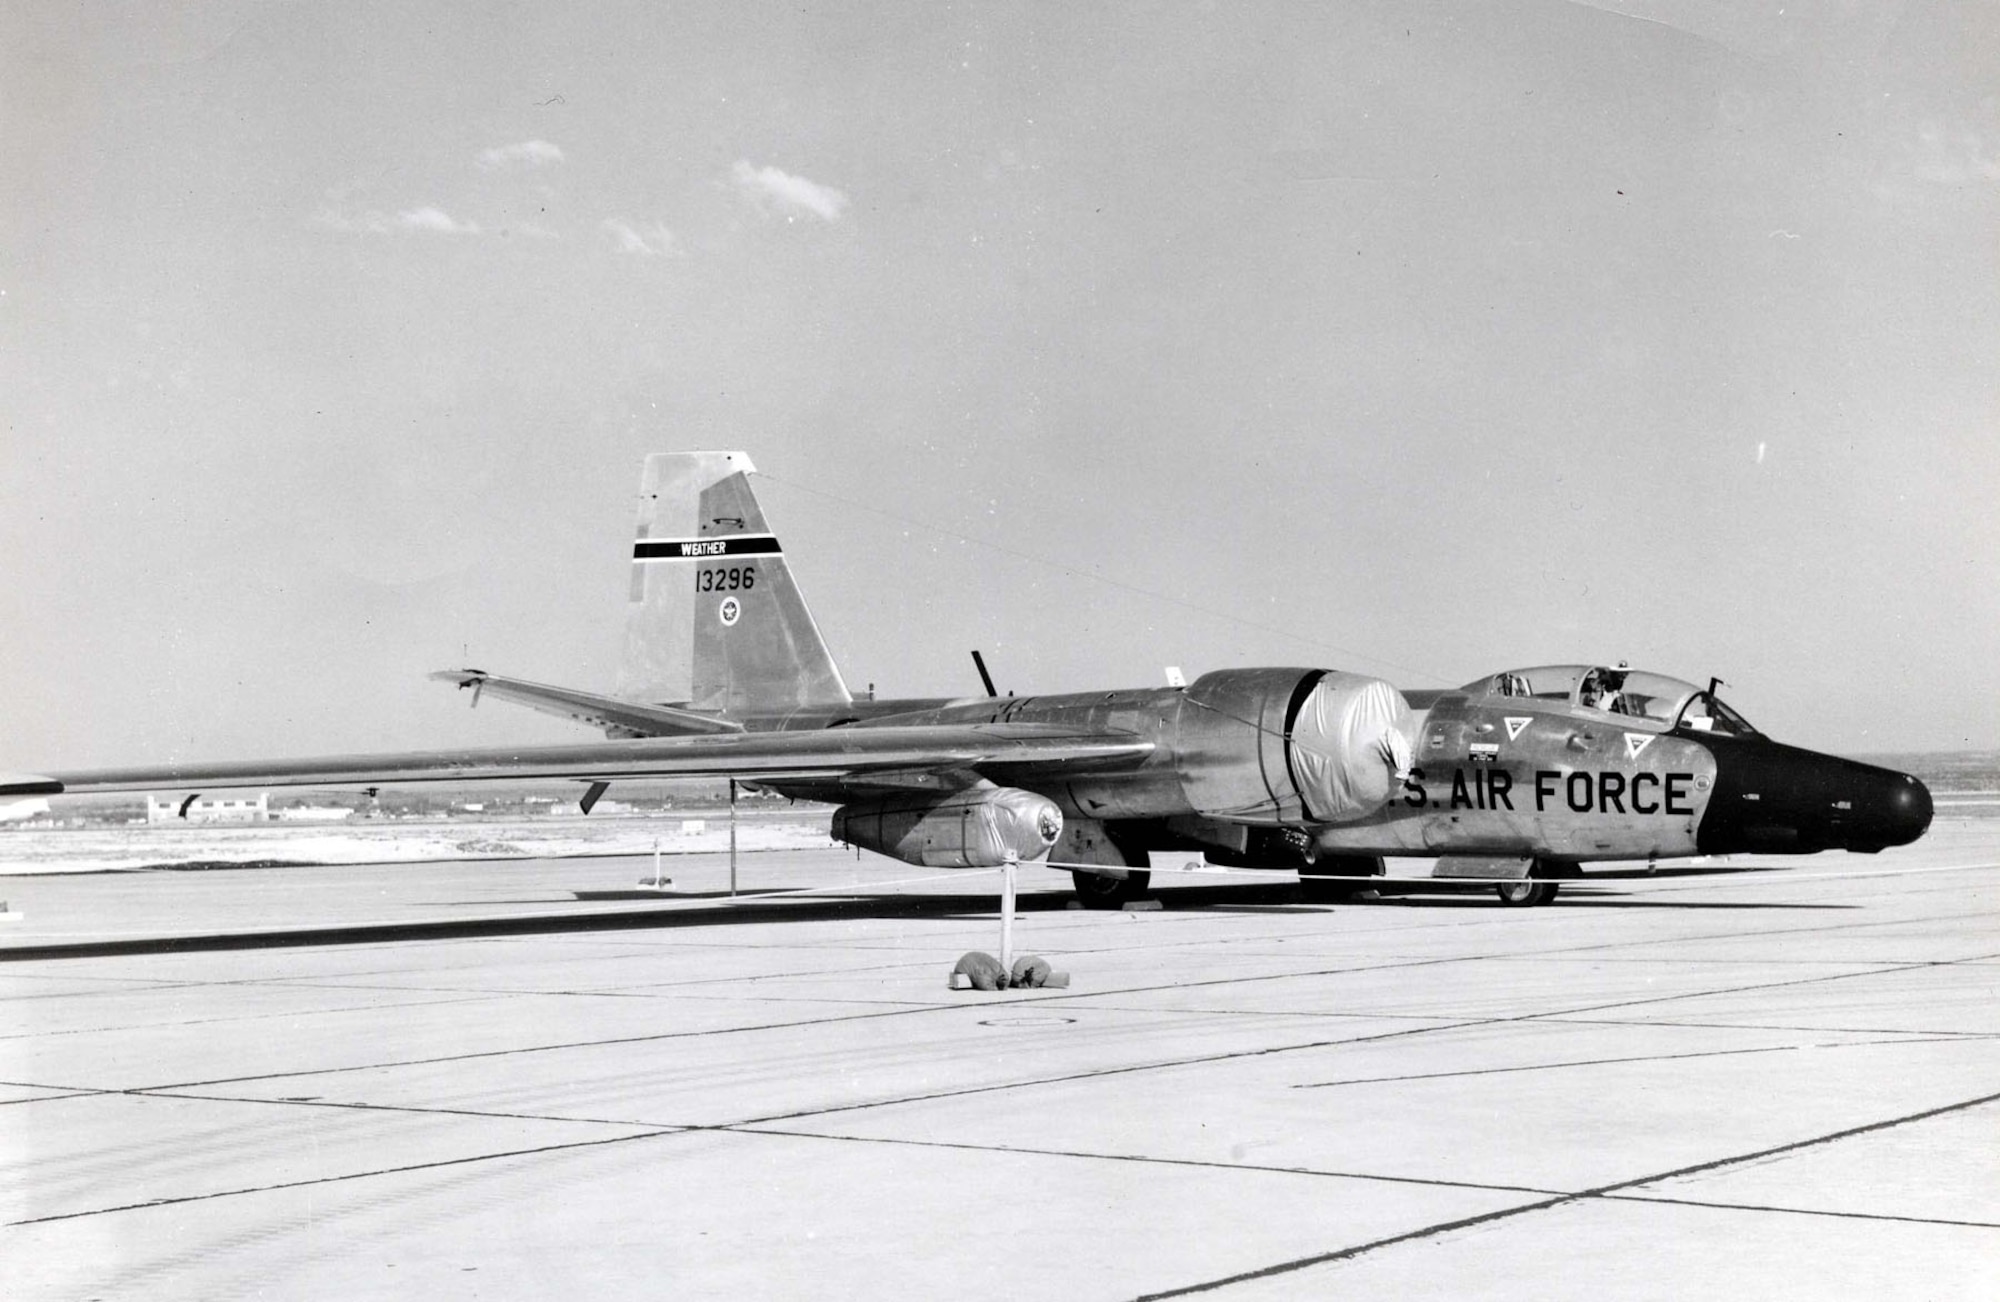 General Dynamics RB-57F Canberra 3/4 front view (S/N 63-13296) Originally, this aircraft was a B-57B, S/N 53-3918, of the 58th Weather Reconnaissance Squadron. Photo taken at Webb AFB, Texas on May 8, 1965. (U.S. Air Force photo)